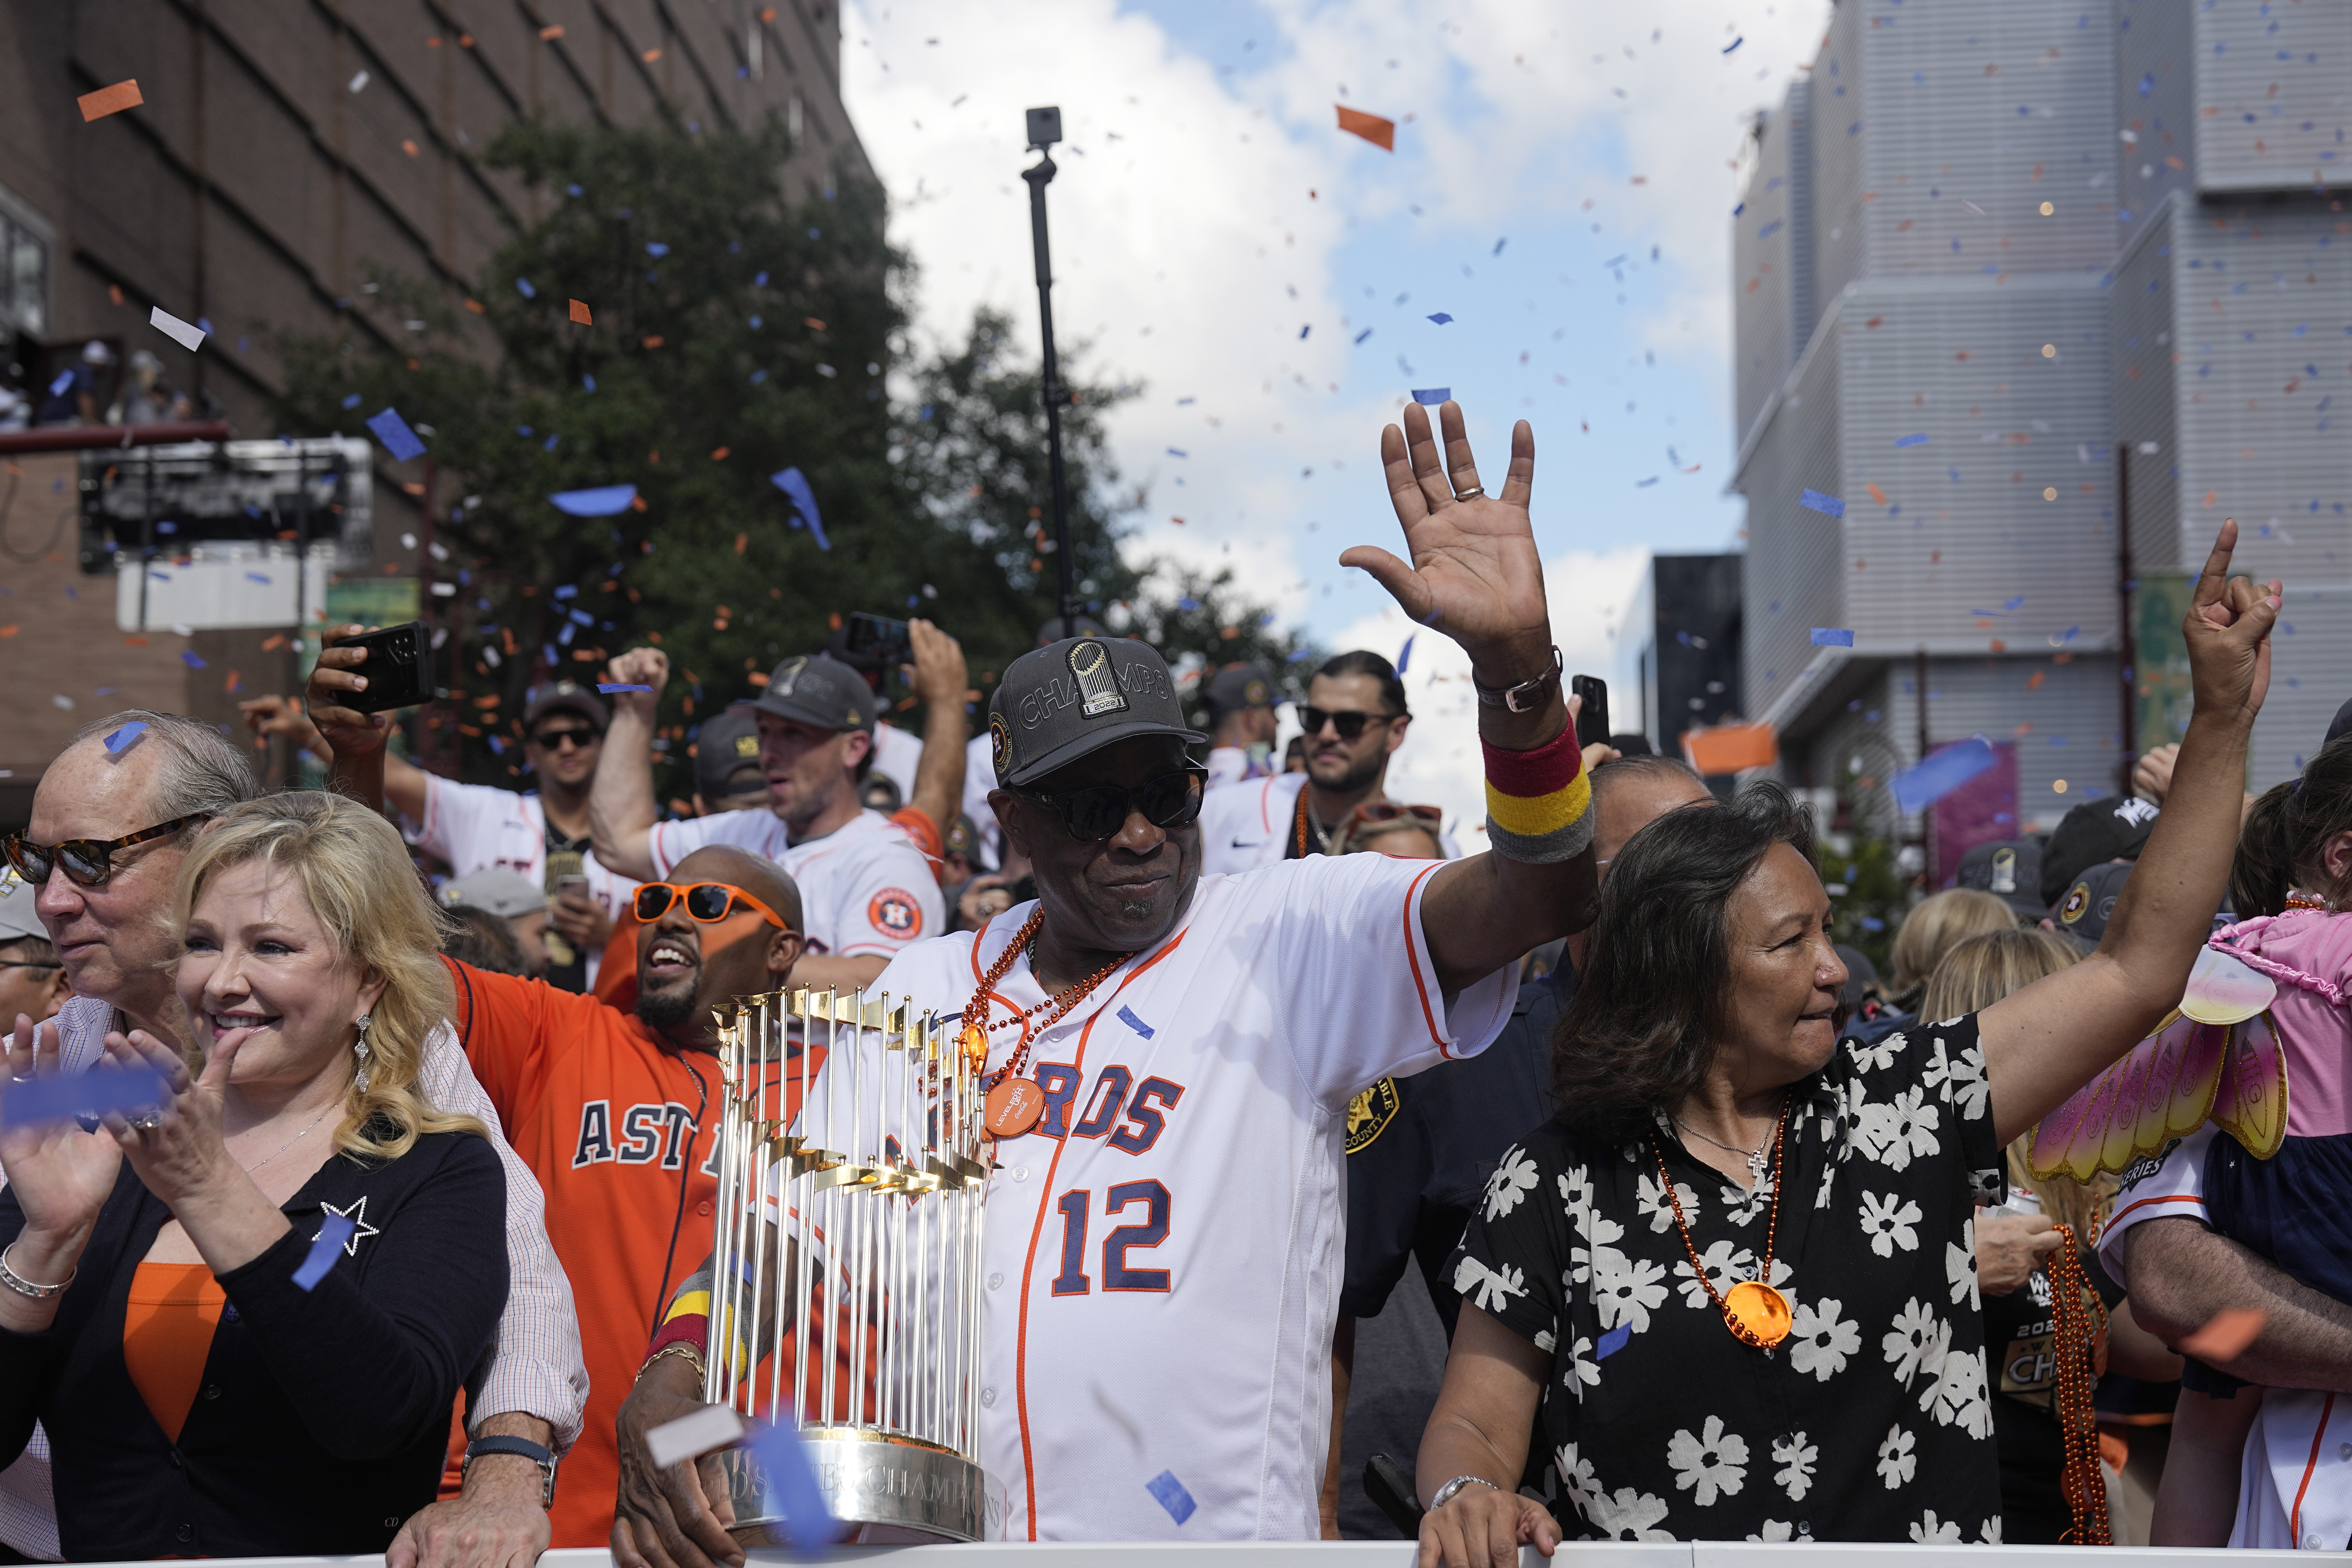 Astros, fans celebrate World Series win with parade